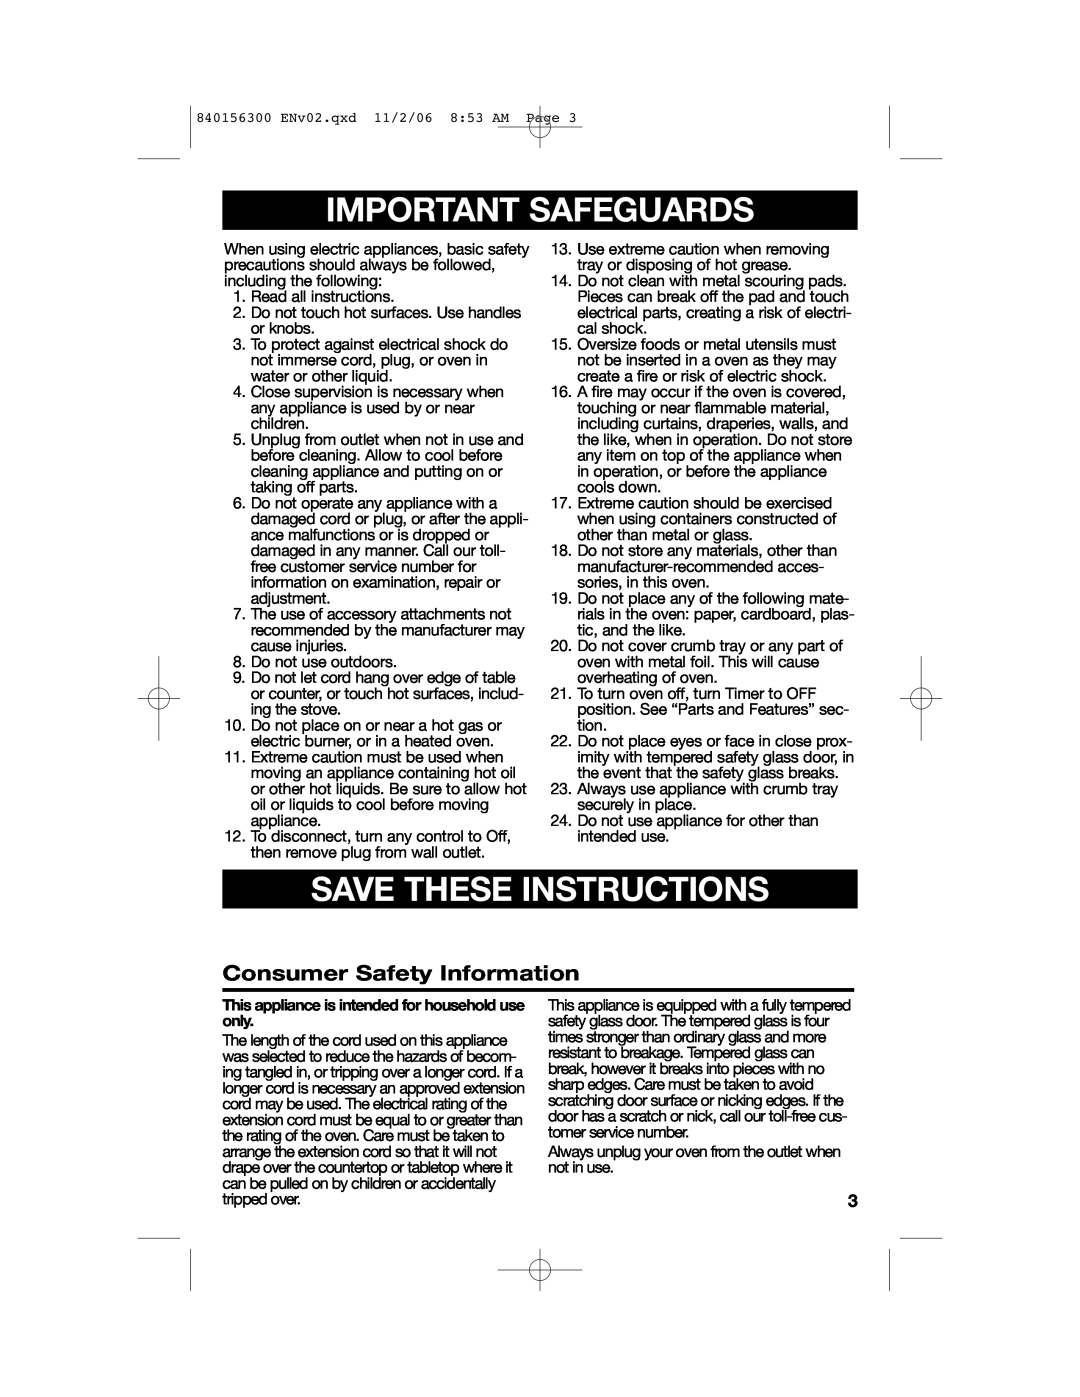 Hamilton Beach 840156300 manual Important Safeguards, Save These Instructions, Consumer Safety Information 